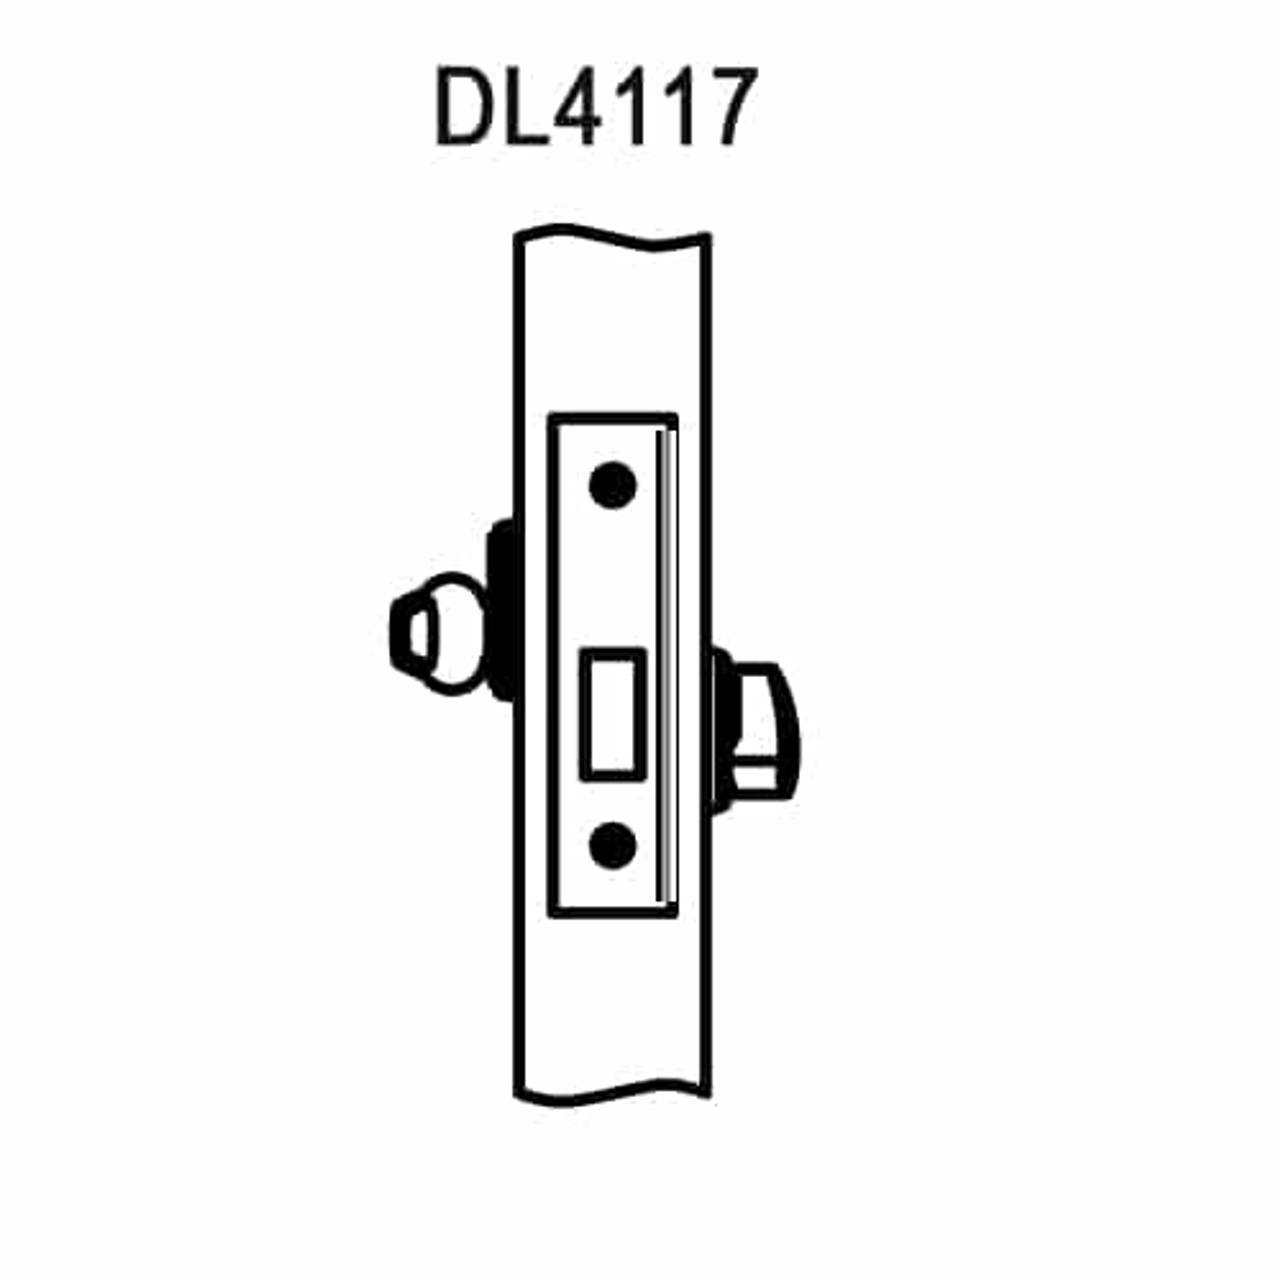 DL4117-619-CL6 Corbin DL4100 Series Classroom Mortise Deadlocks with Single Cylinder in Satin Nickel